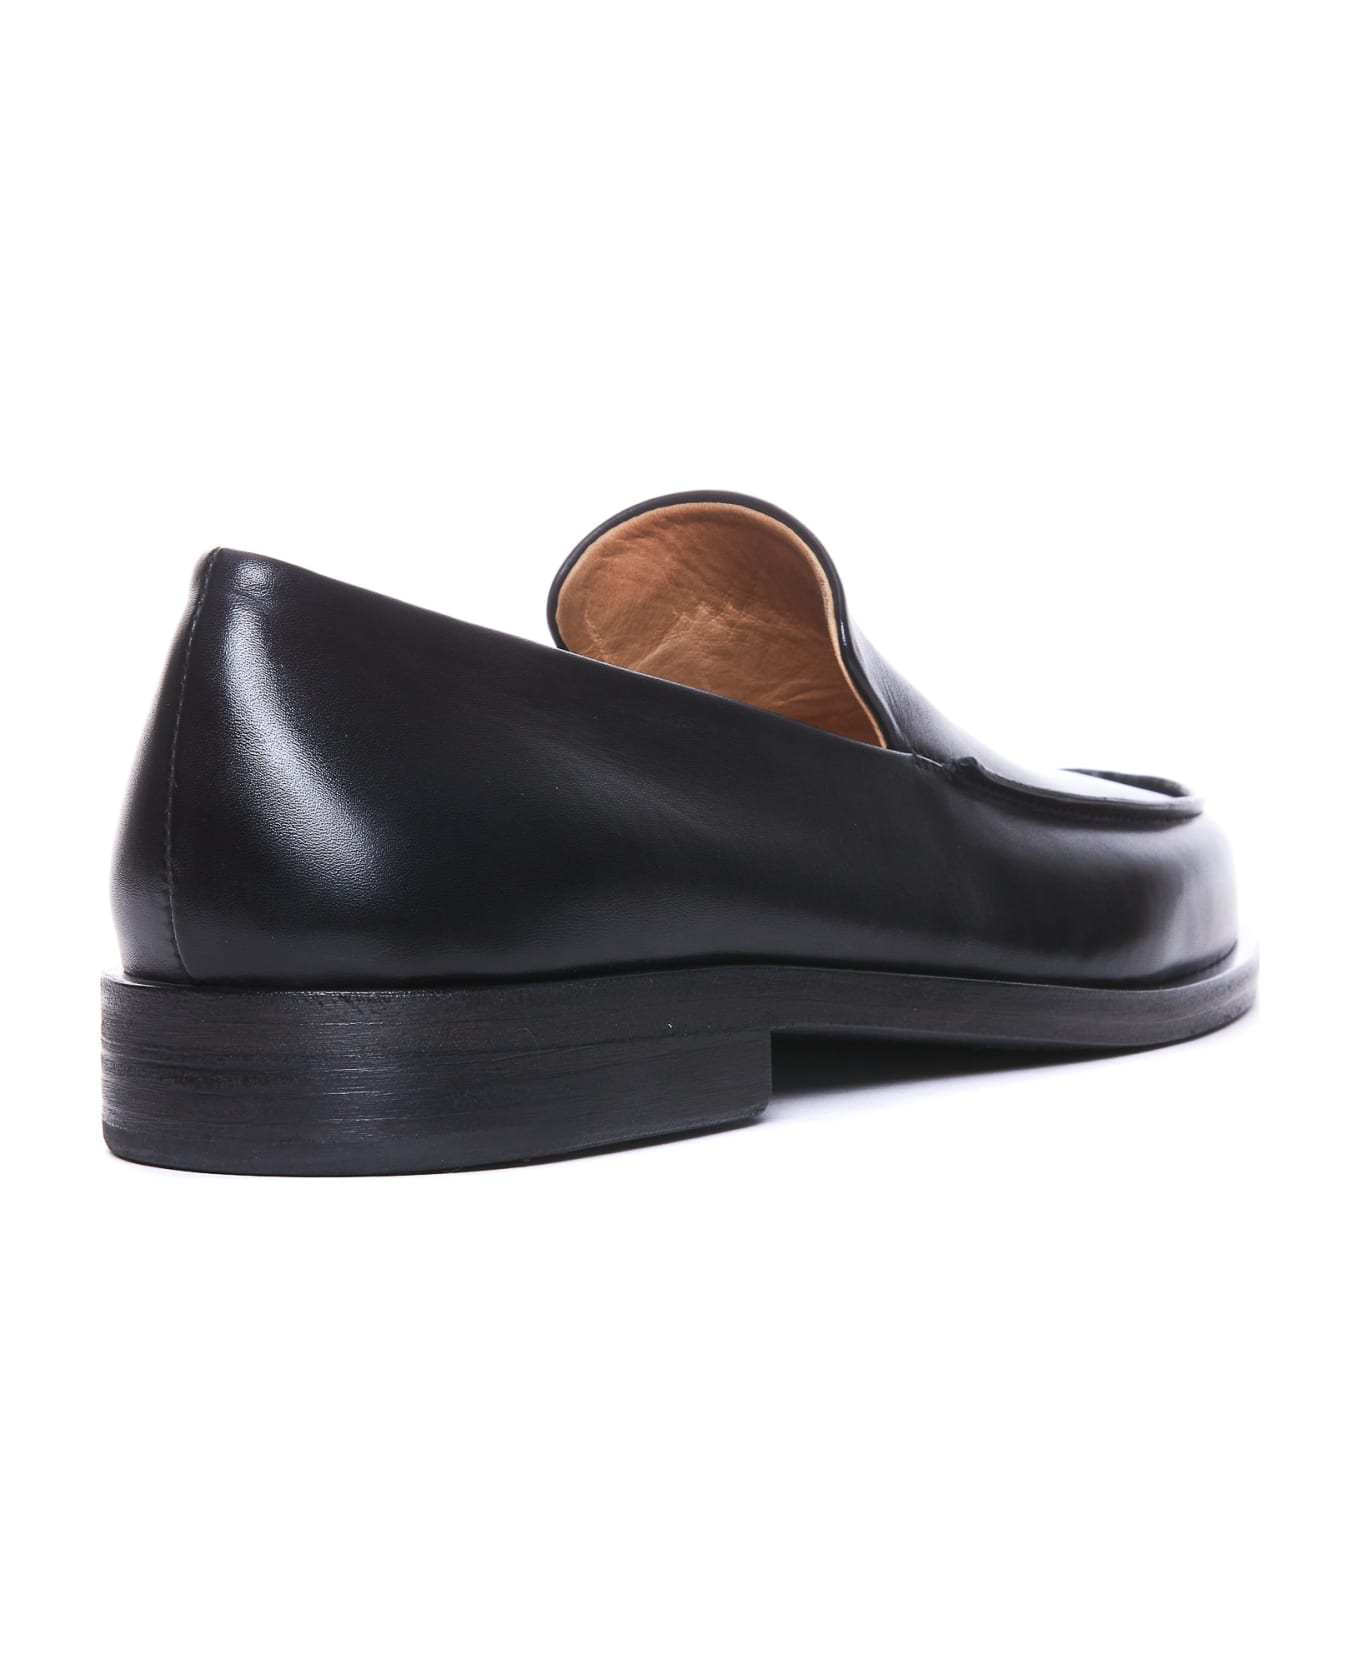 Marsell Loafers - Black フラットシューズ